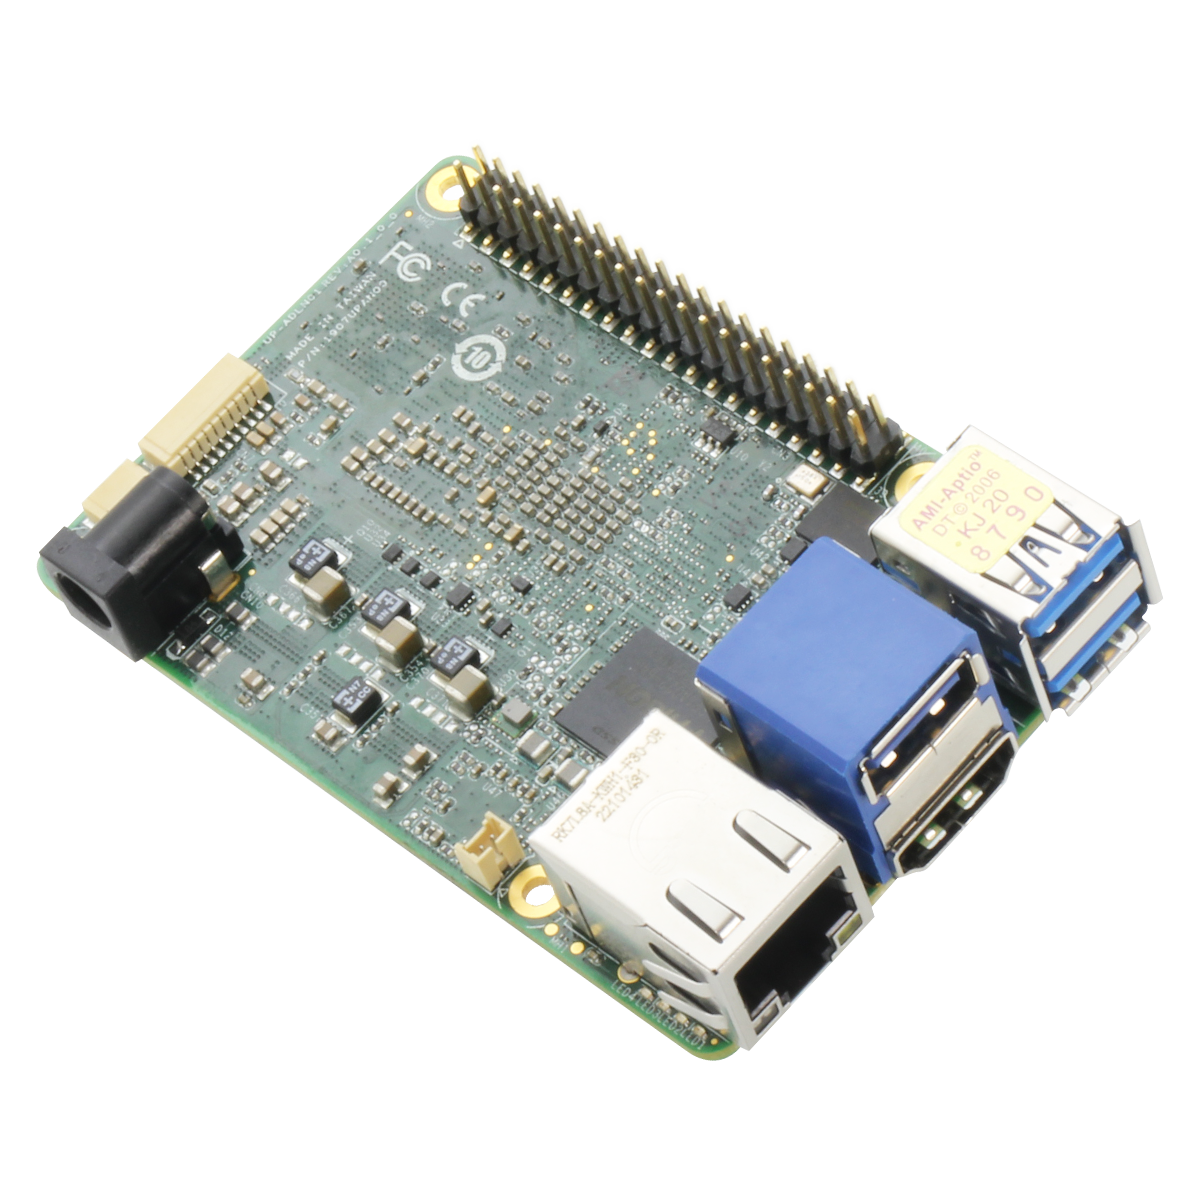 UP 7000 embedded board, front view